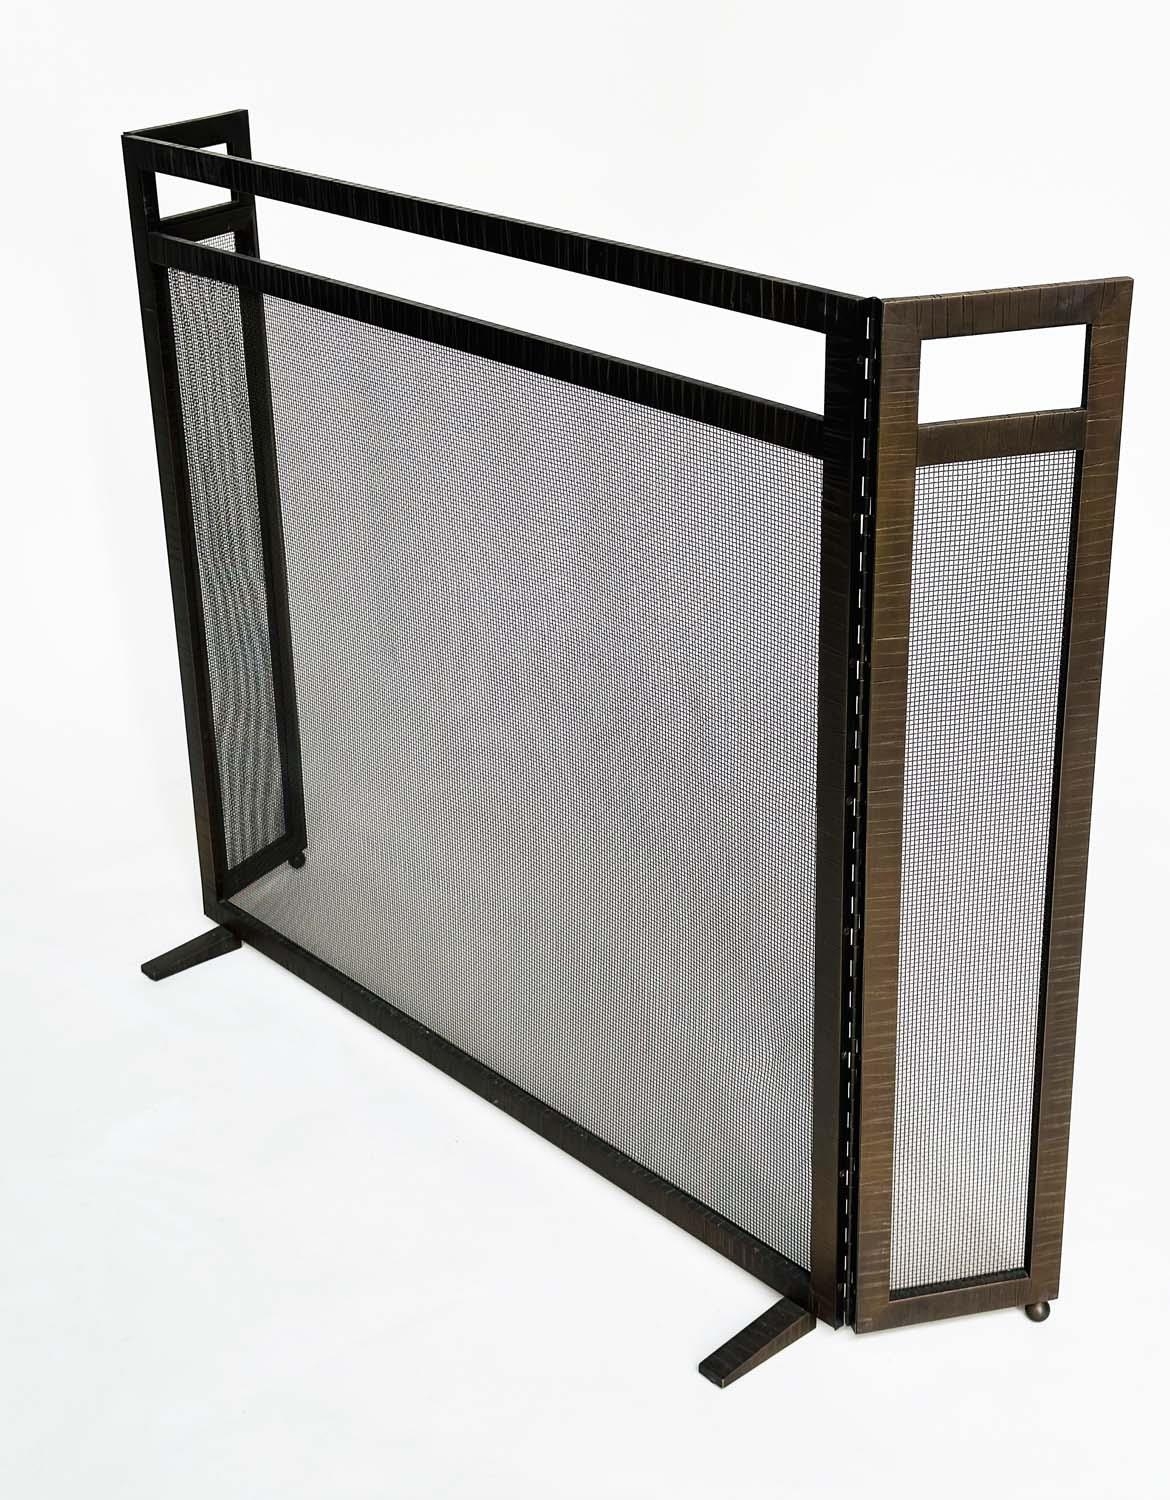 NURSERY FENDER BY 'FORGEABILITY', wrought iron and mesh panelled folding, 80cm H x 90cm W x 18cm D